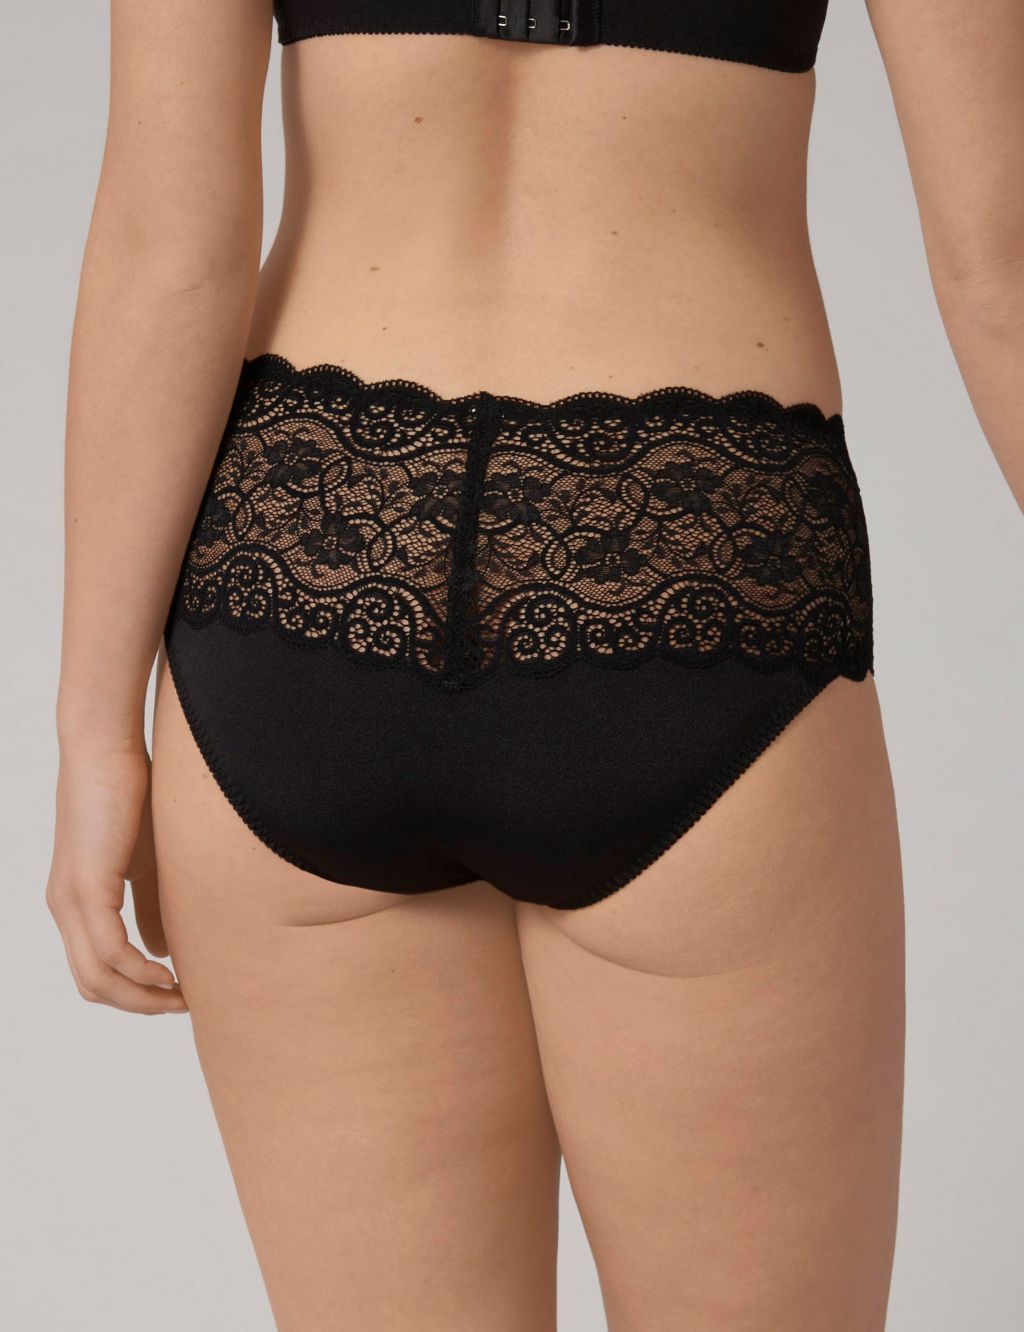 Amourette 300 All Over Lace Full Briefs image 3